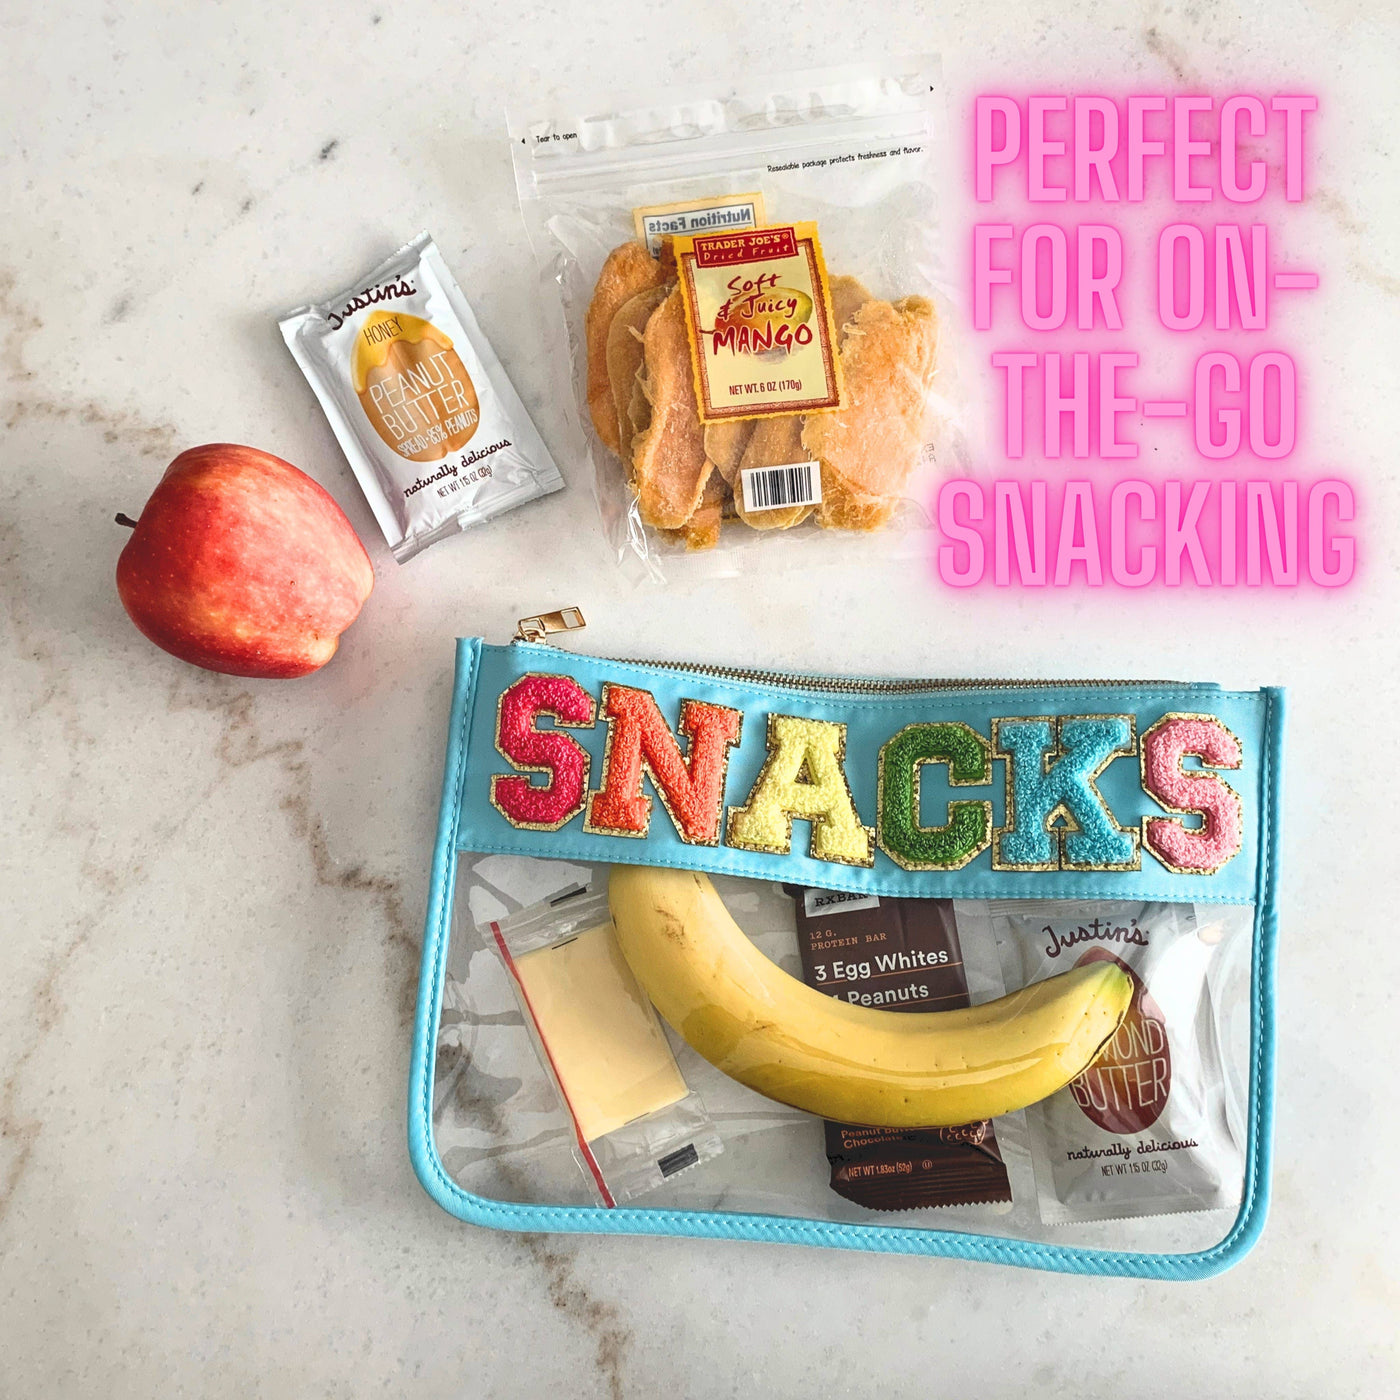 "SNACKS" Large Clear Chenille Letter Patch Pouch